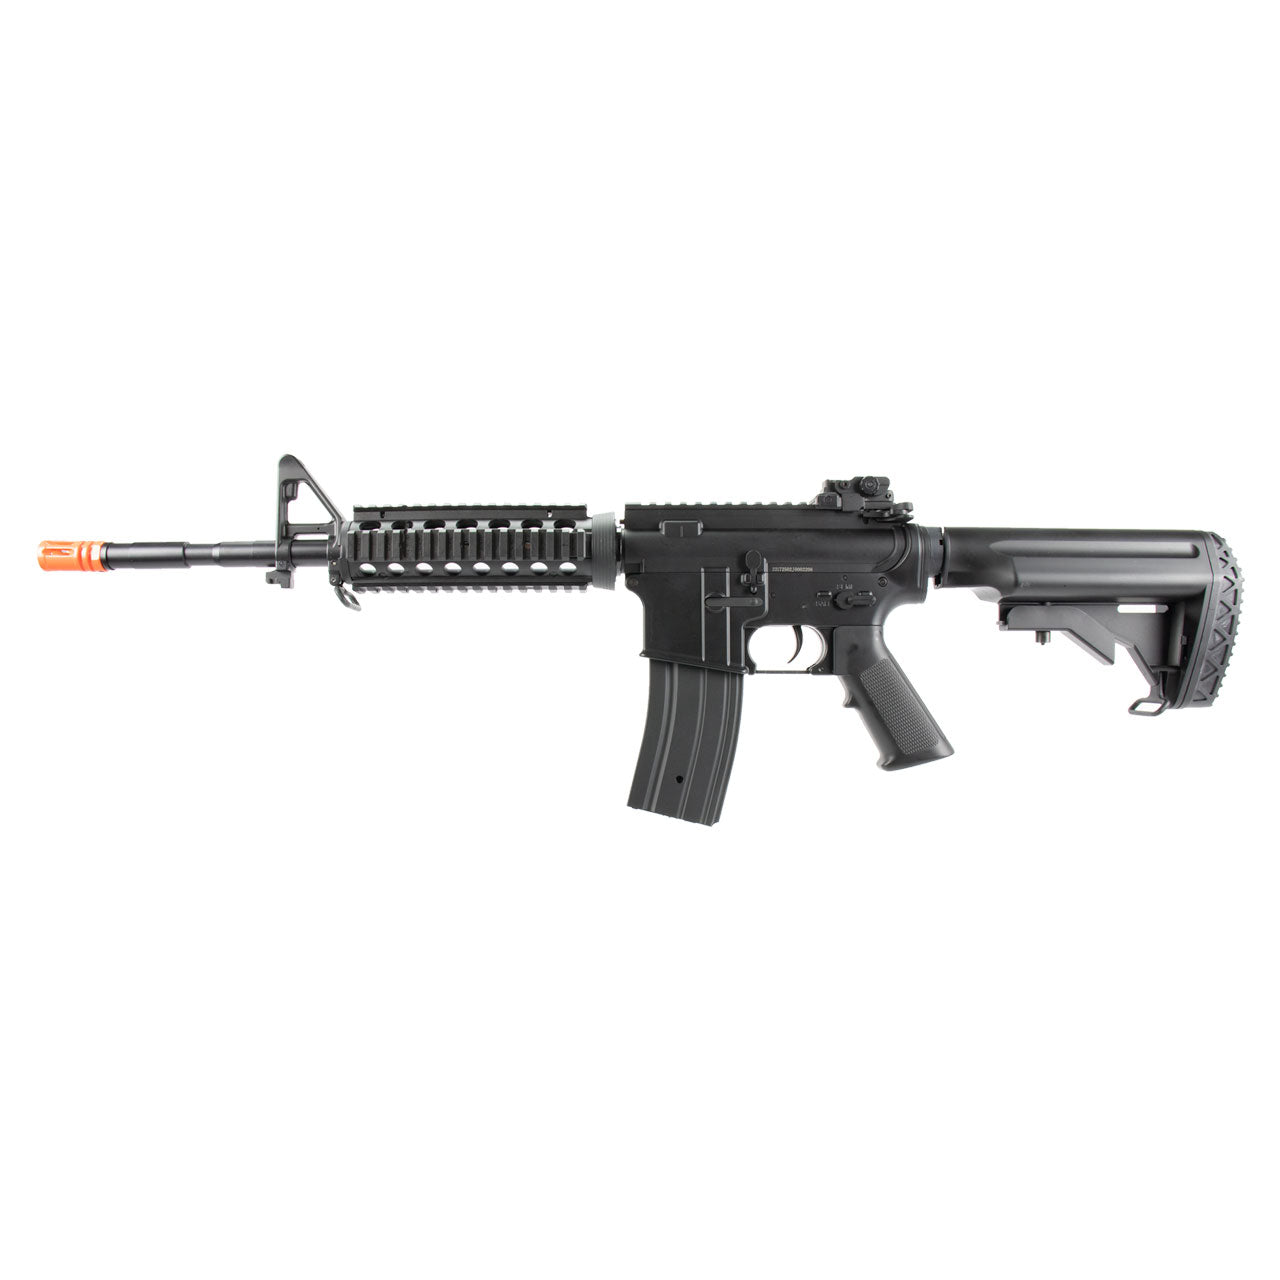 GE / JG M4 SOPMOD RIS Airsoft AEG Rifle with Rail Covers w/ Battery and Charger